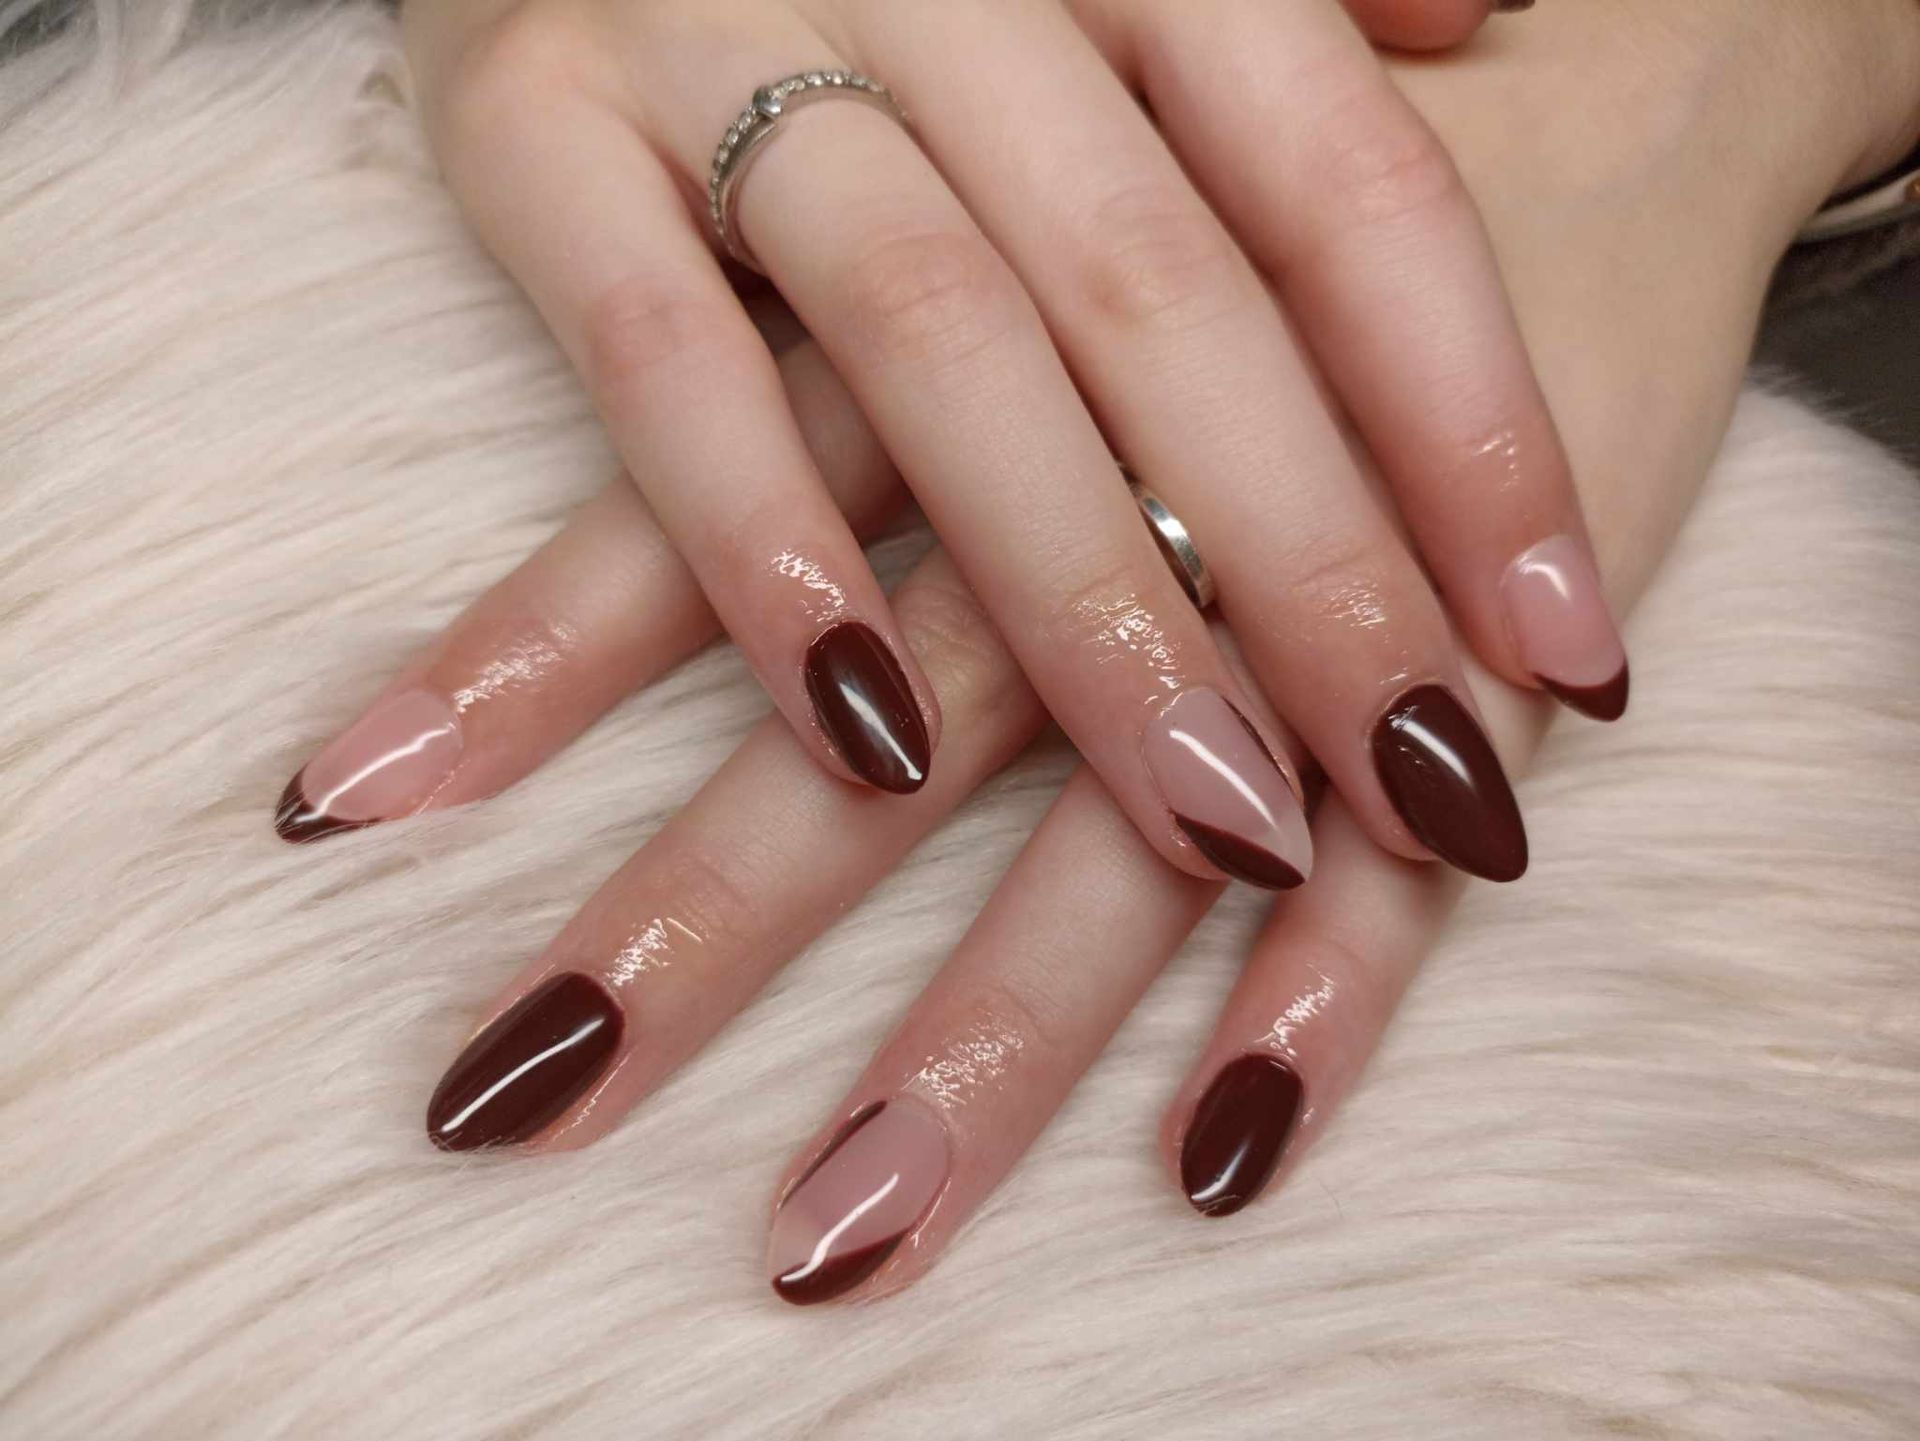 Ongles couleur chocolat